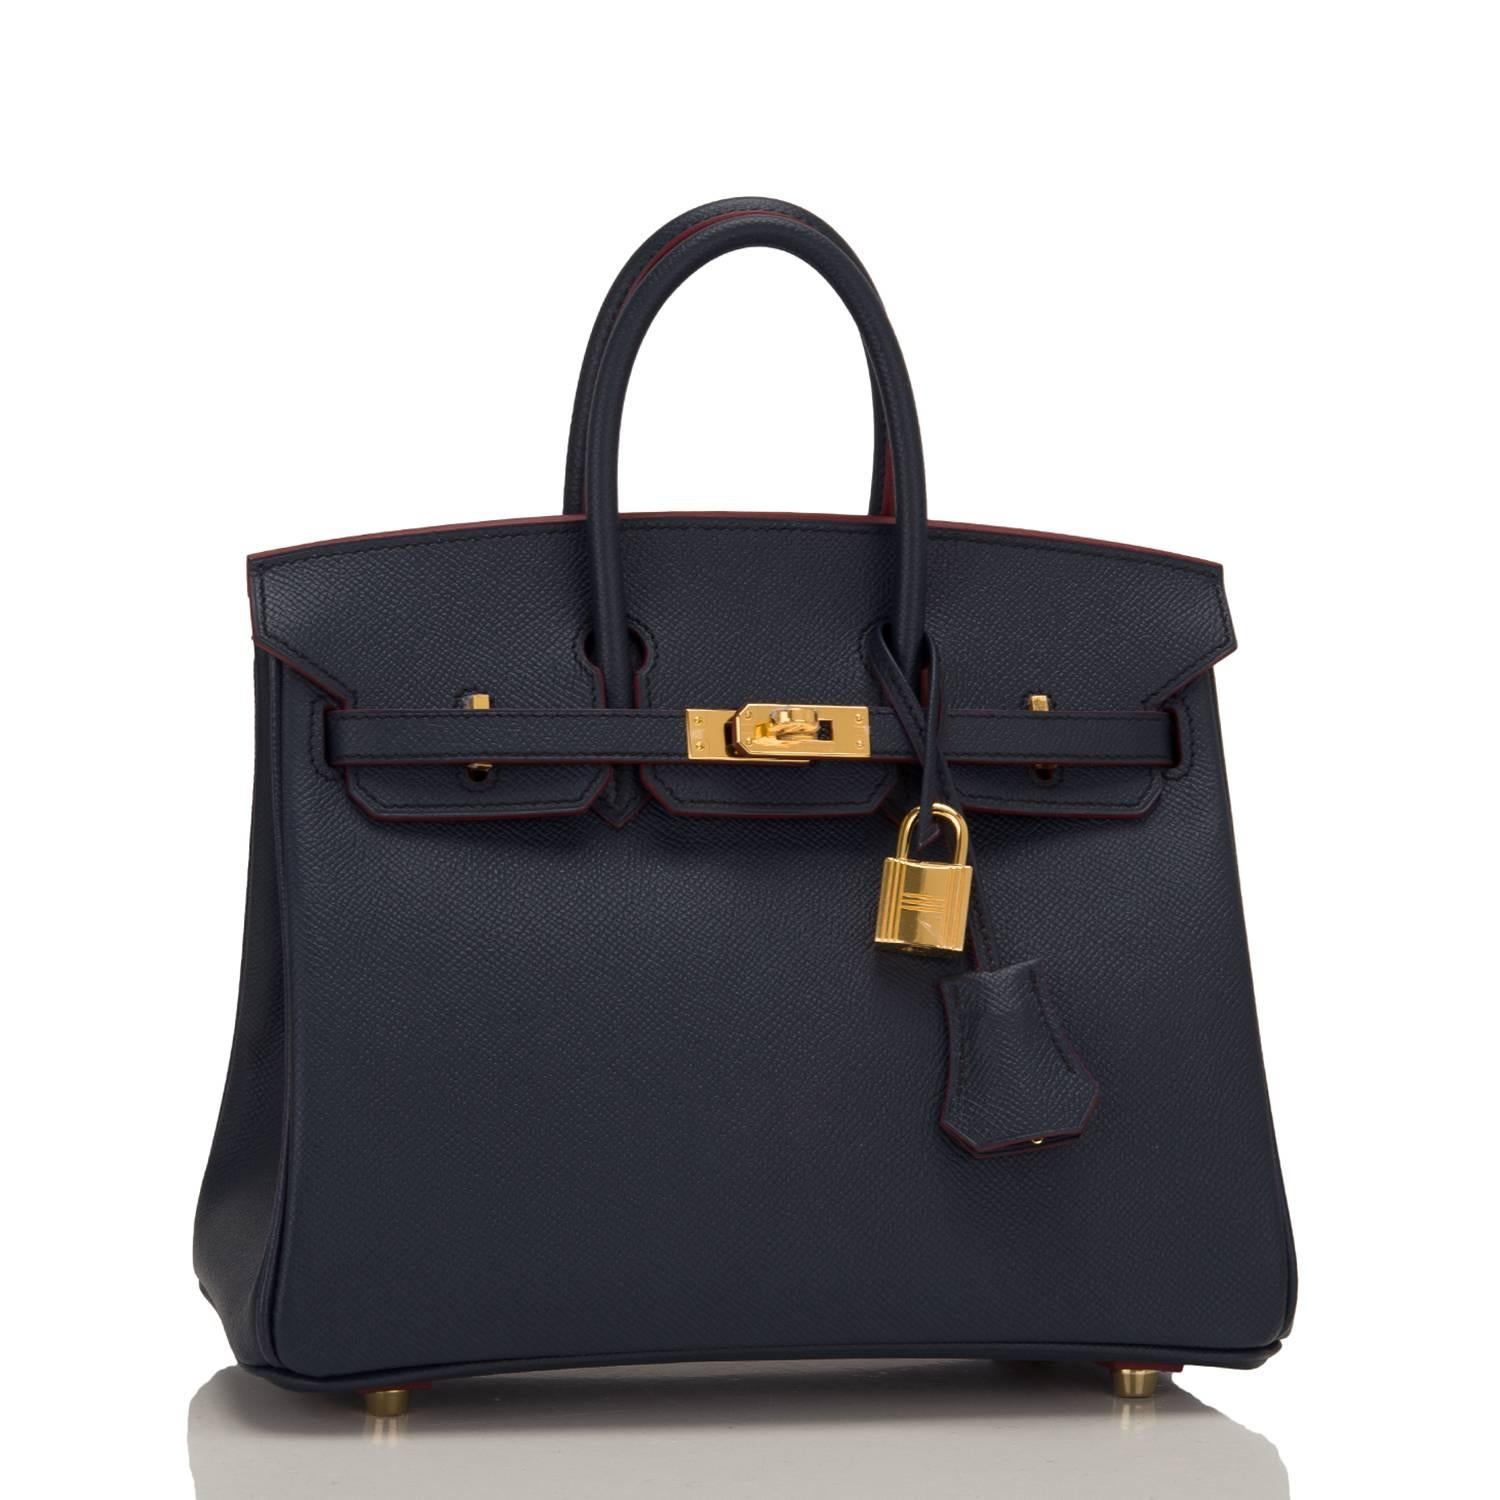 Hermes Blue Indigo and Rouge H Contour 25cm Birkin of epsom leather with gold hardware.

This limited edition Birkin features contour Rouge H stitching, a front toggle closure, a clochette with lock and two keys, and double rolled handles.

The